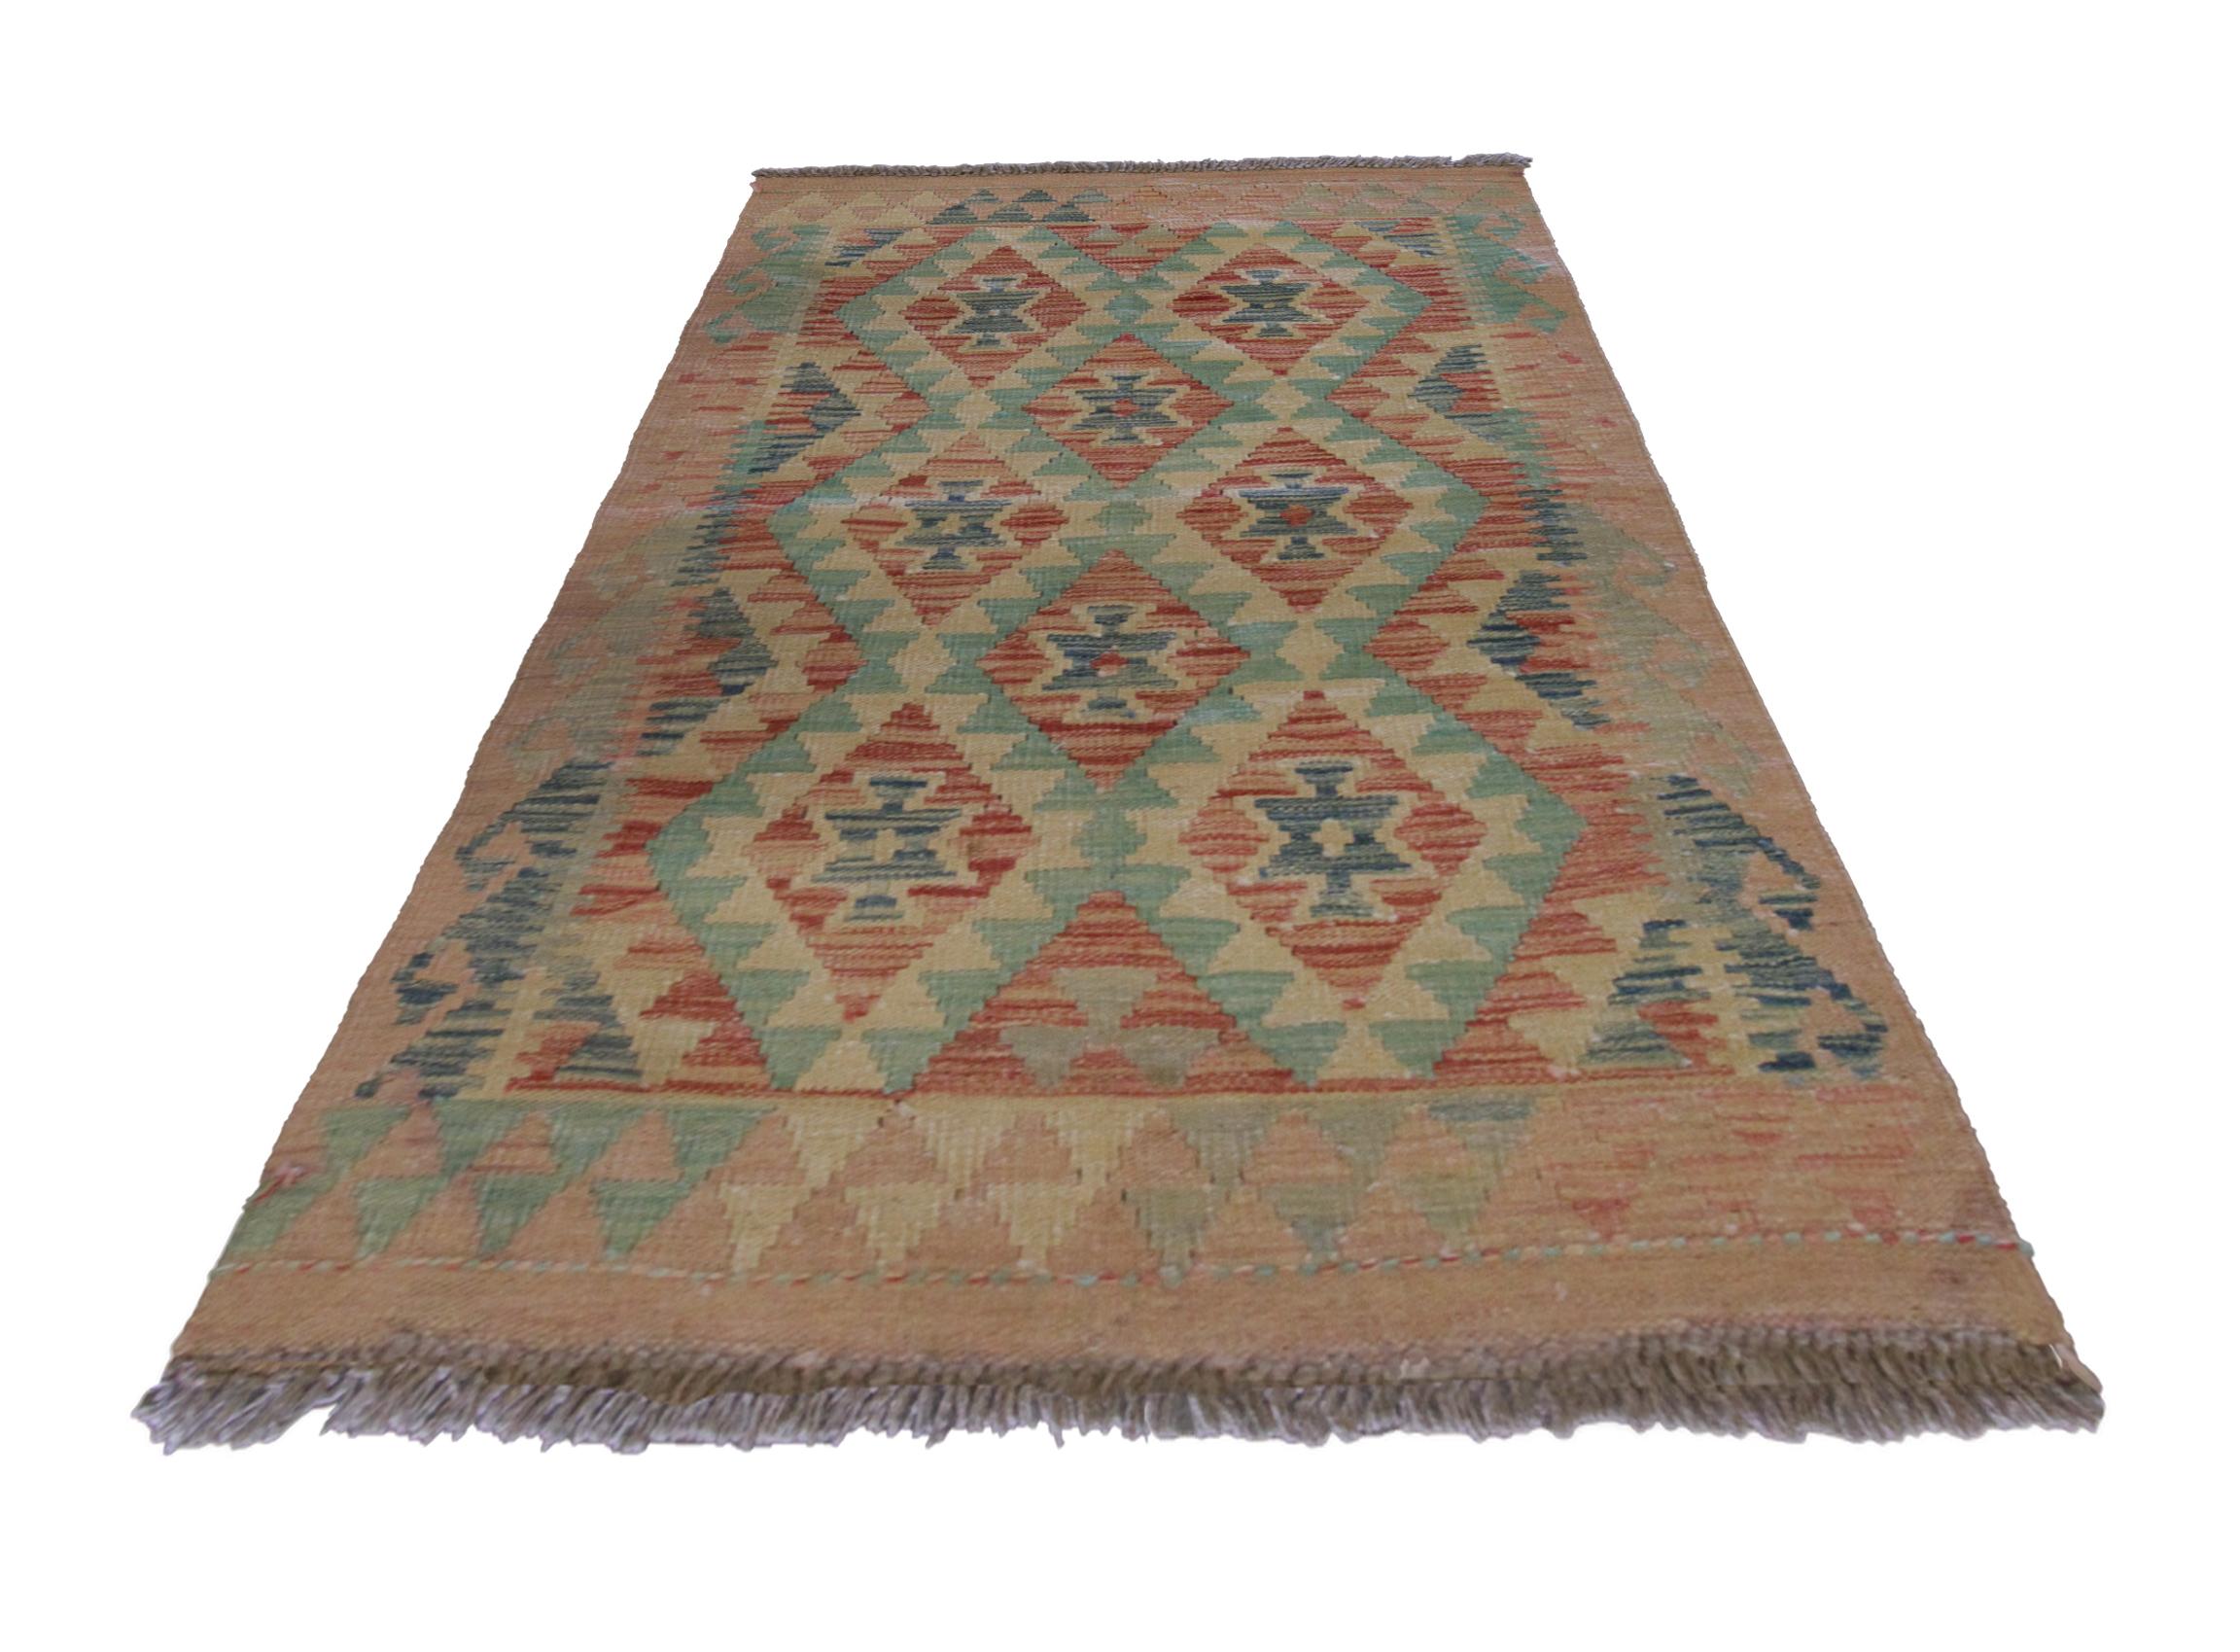 This bold wool area rug has been woven with a symmetrical geometric diamond design with geometric motifs woven in the centre of each diamond. Woven with a beautiful colour palette including pink, blue, beige, rust and red. A geometric hook border